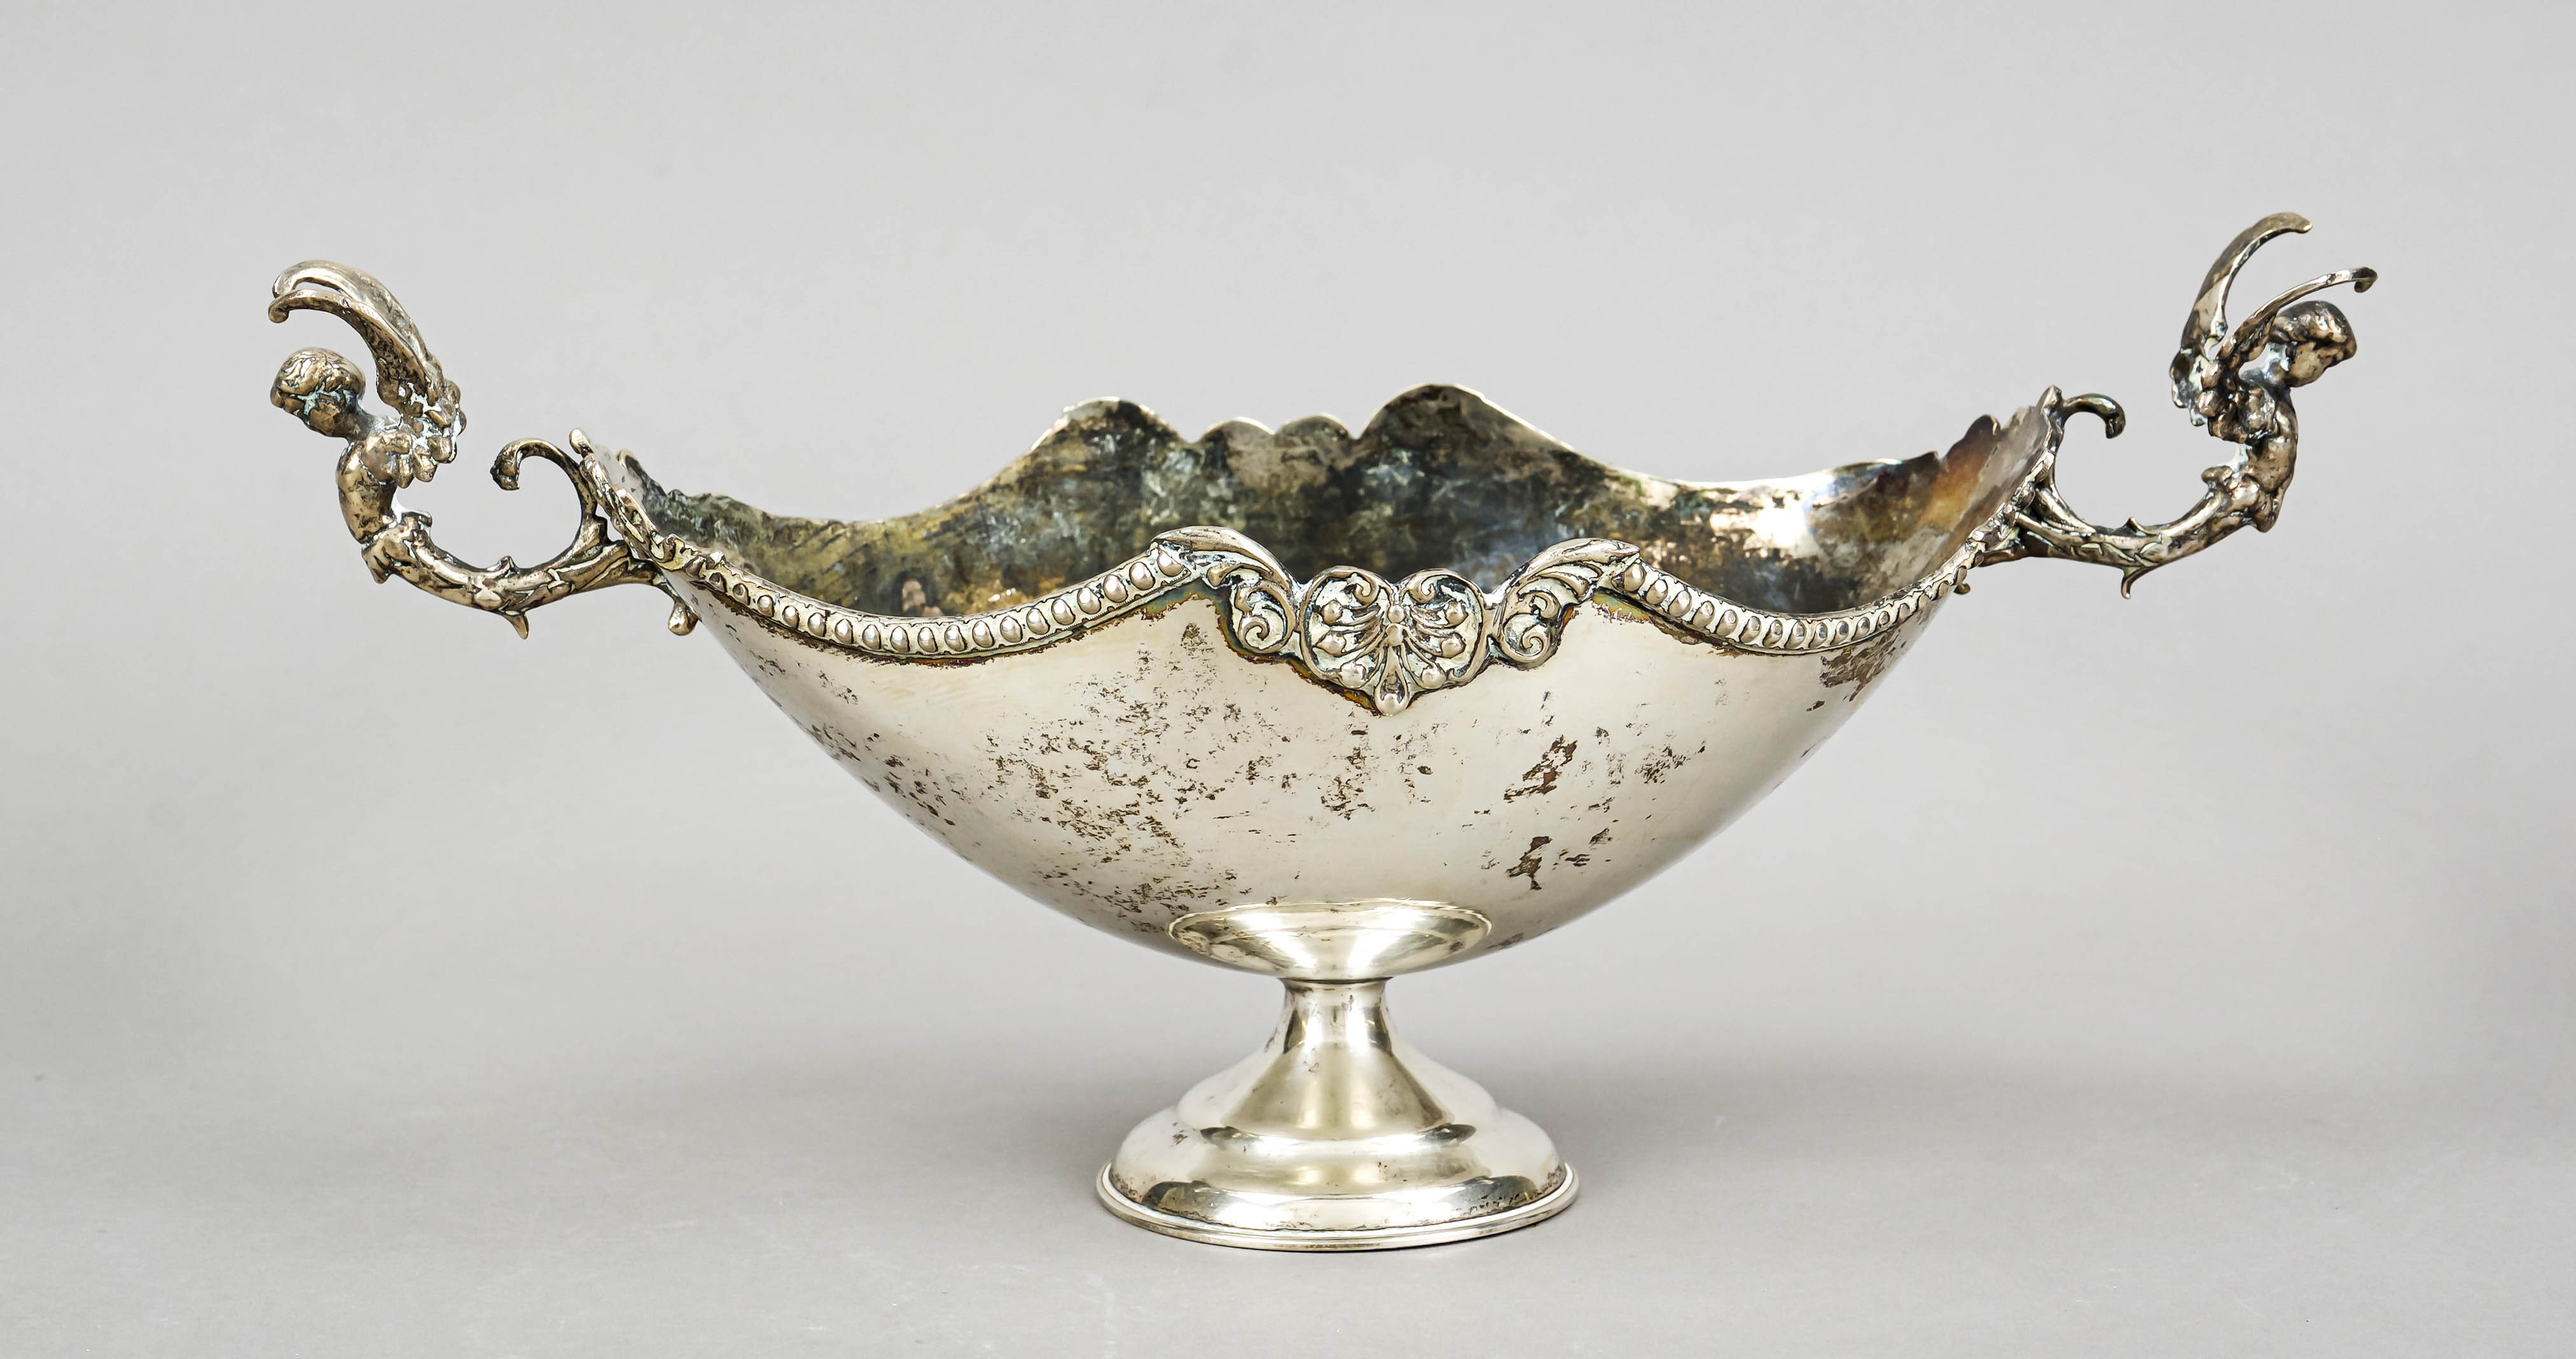 Jardiniere, 20th century, silver tested, round stepped stand, boat-shaped body, figural handles to